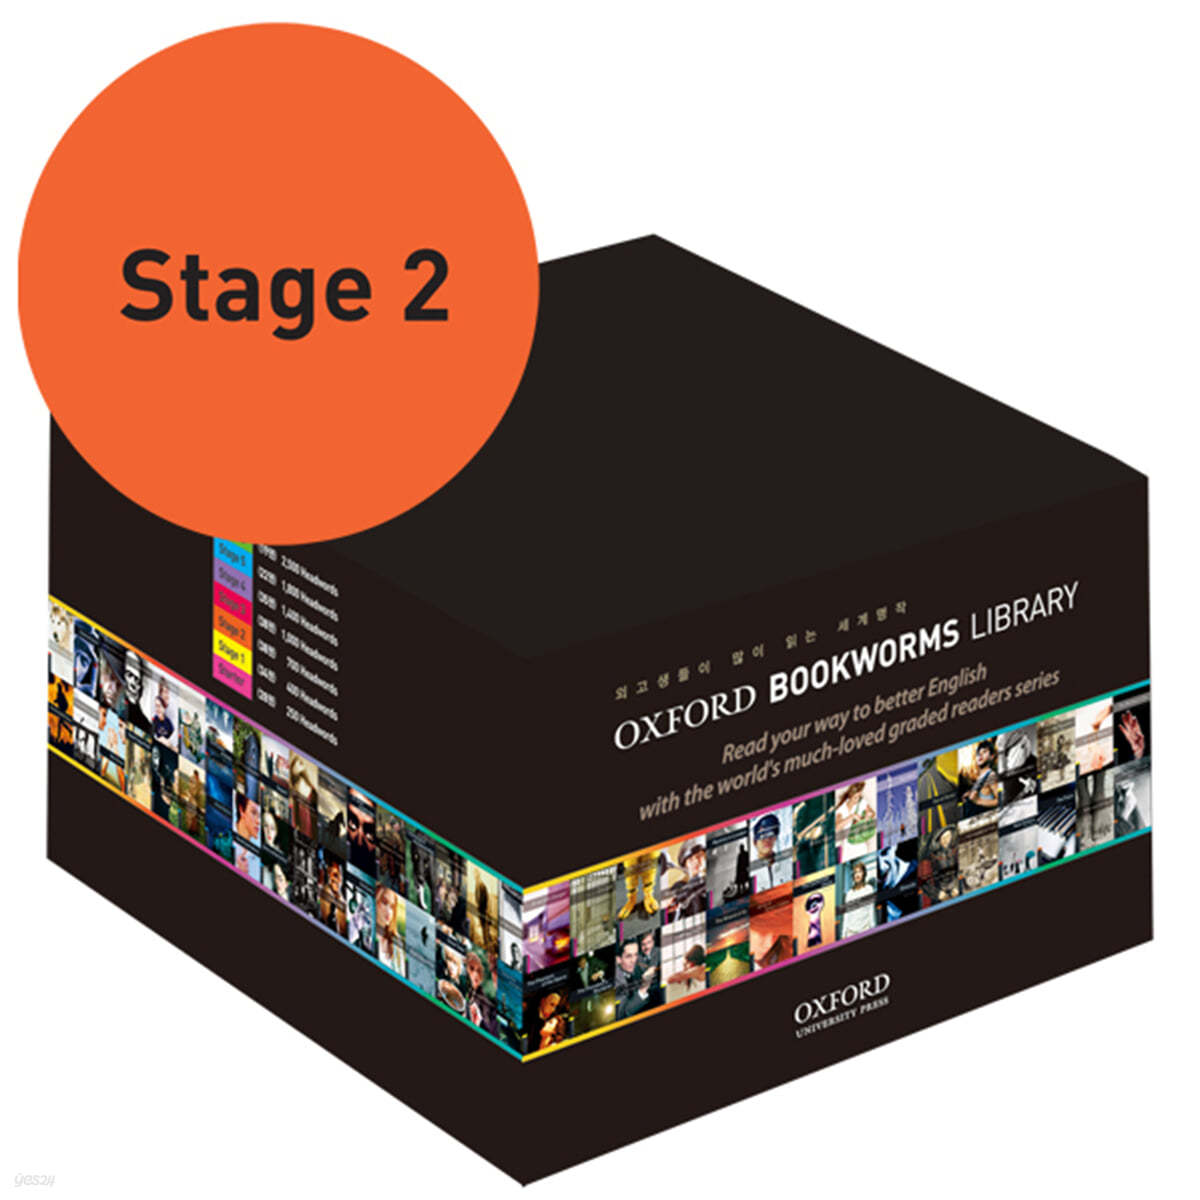 Oxford Bookworms Library Stage 2 Pack [42종], 3/E